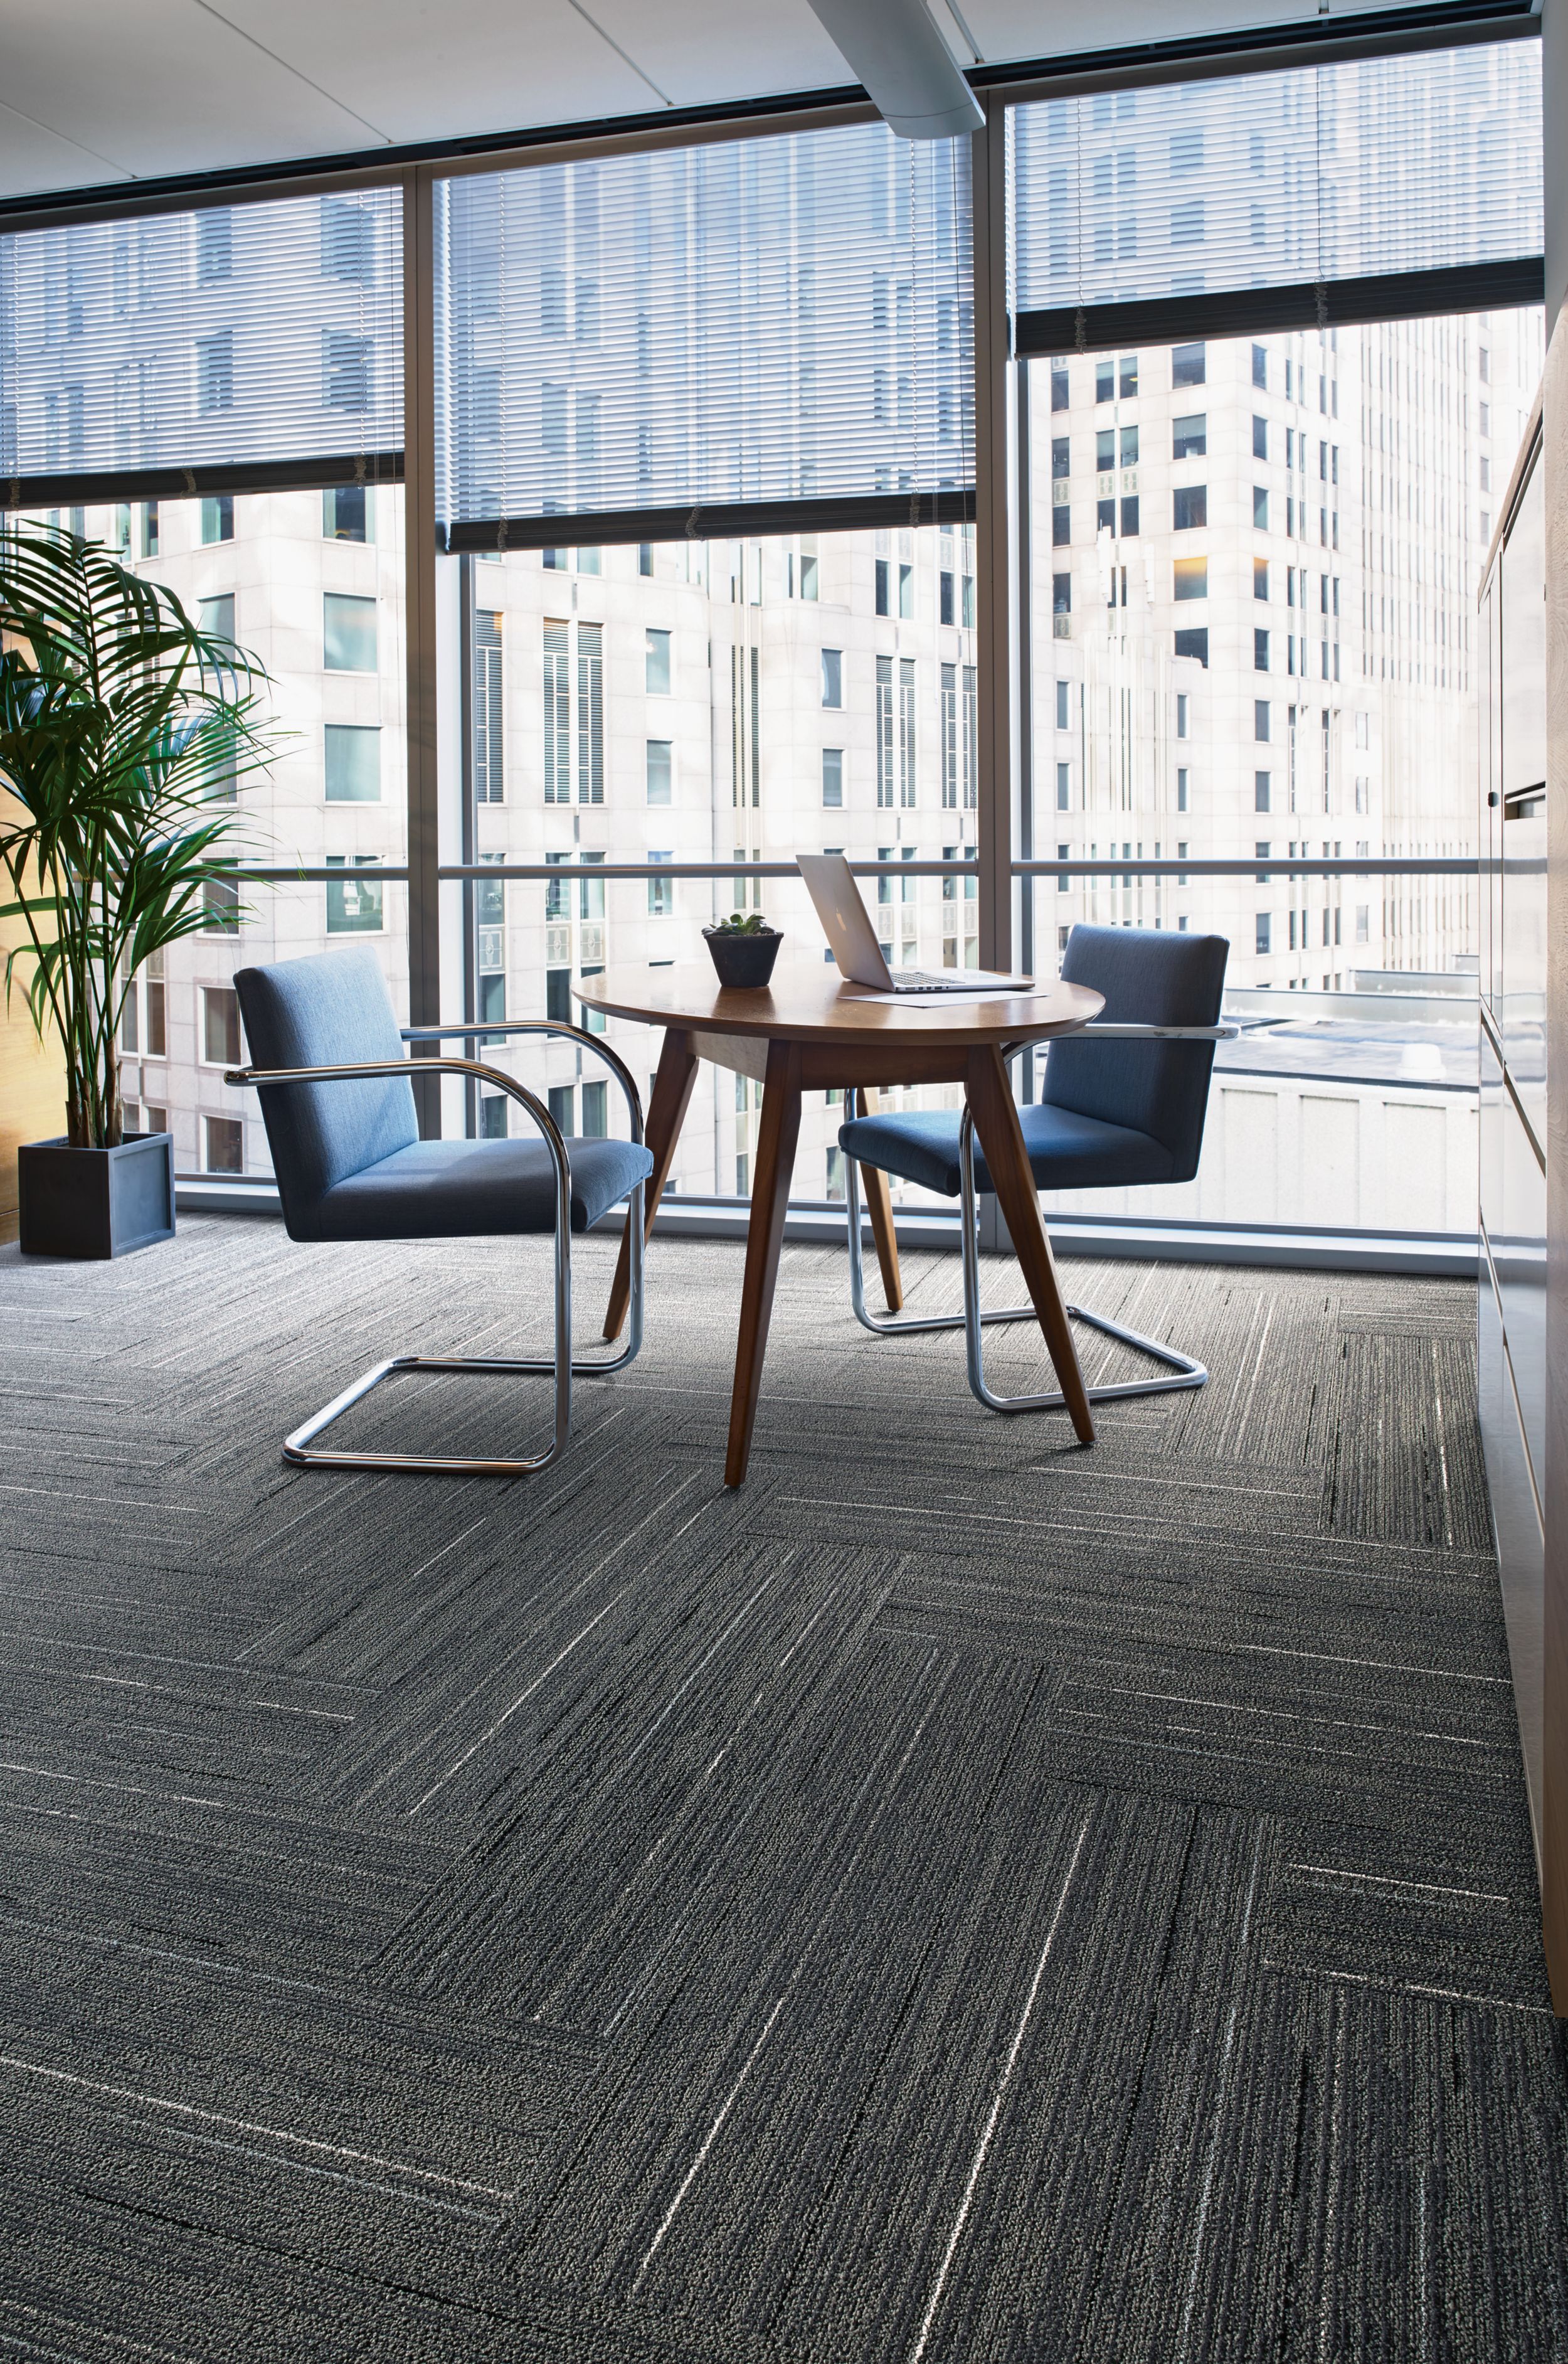 Interface CE172 plank carpet tile in office area with small table and chairs numéro d’image 6